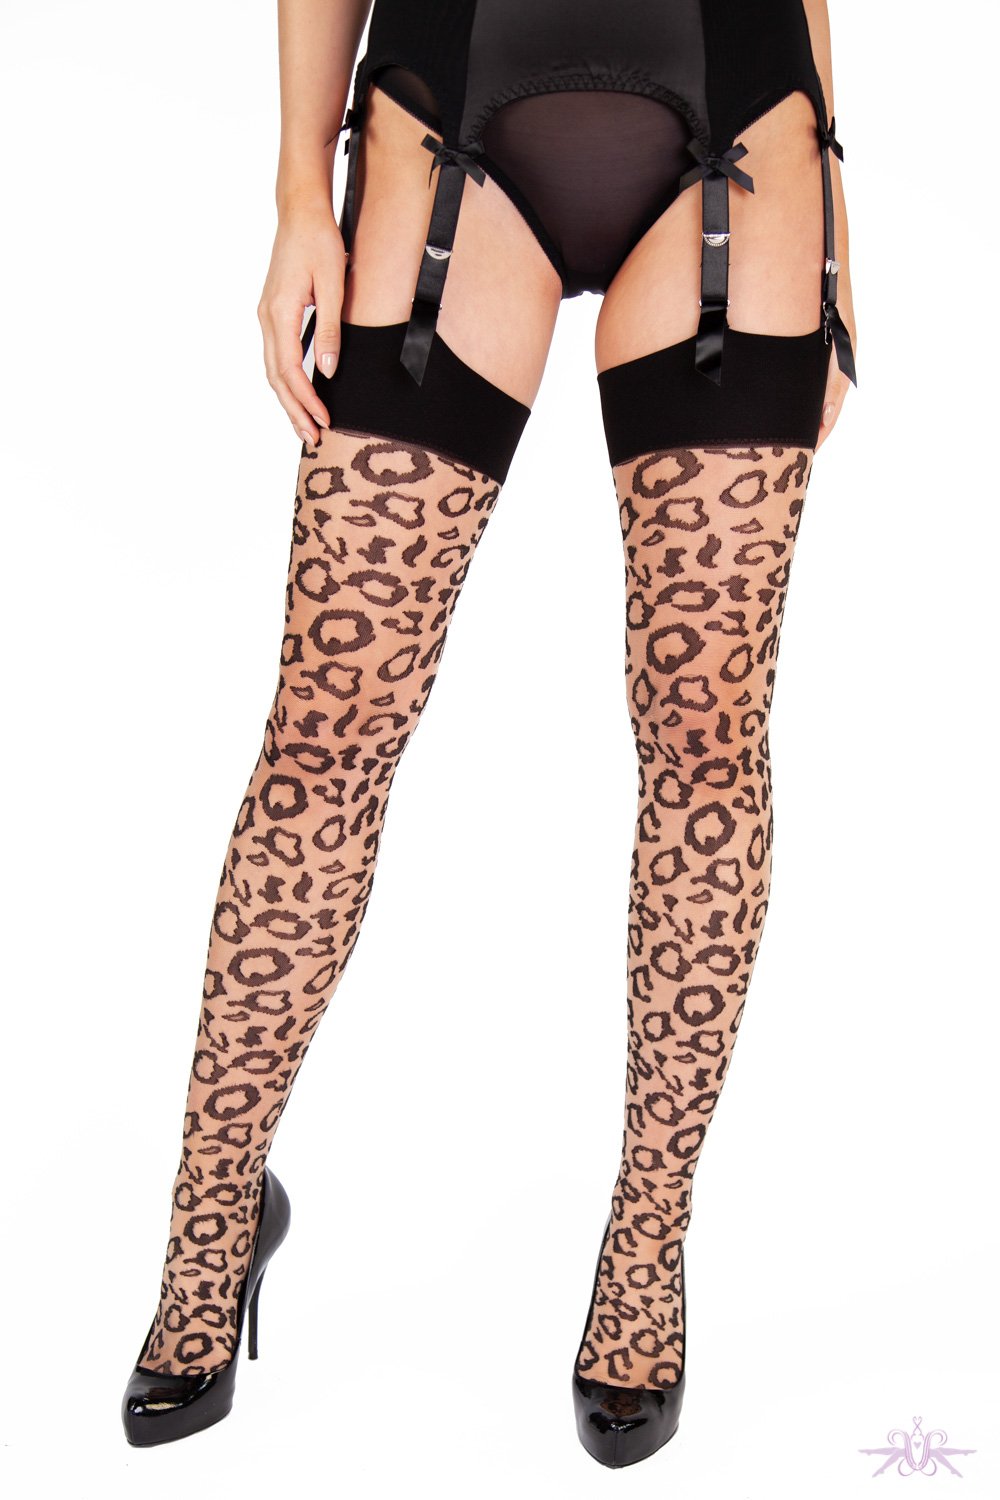 Playful Promises Nude Leopard Knit Stockings